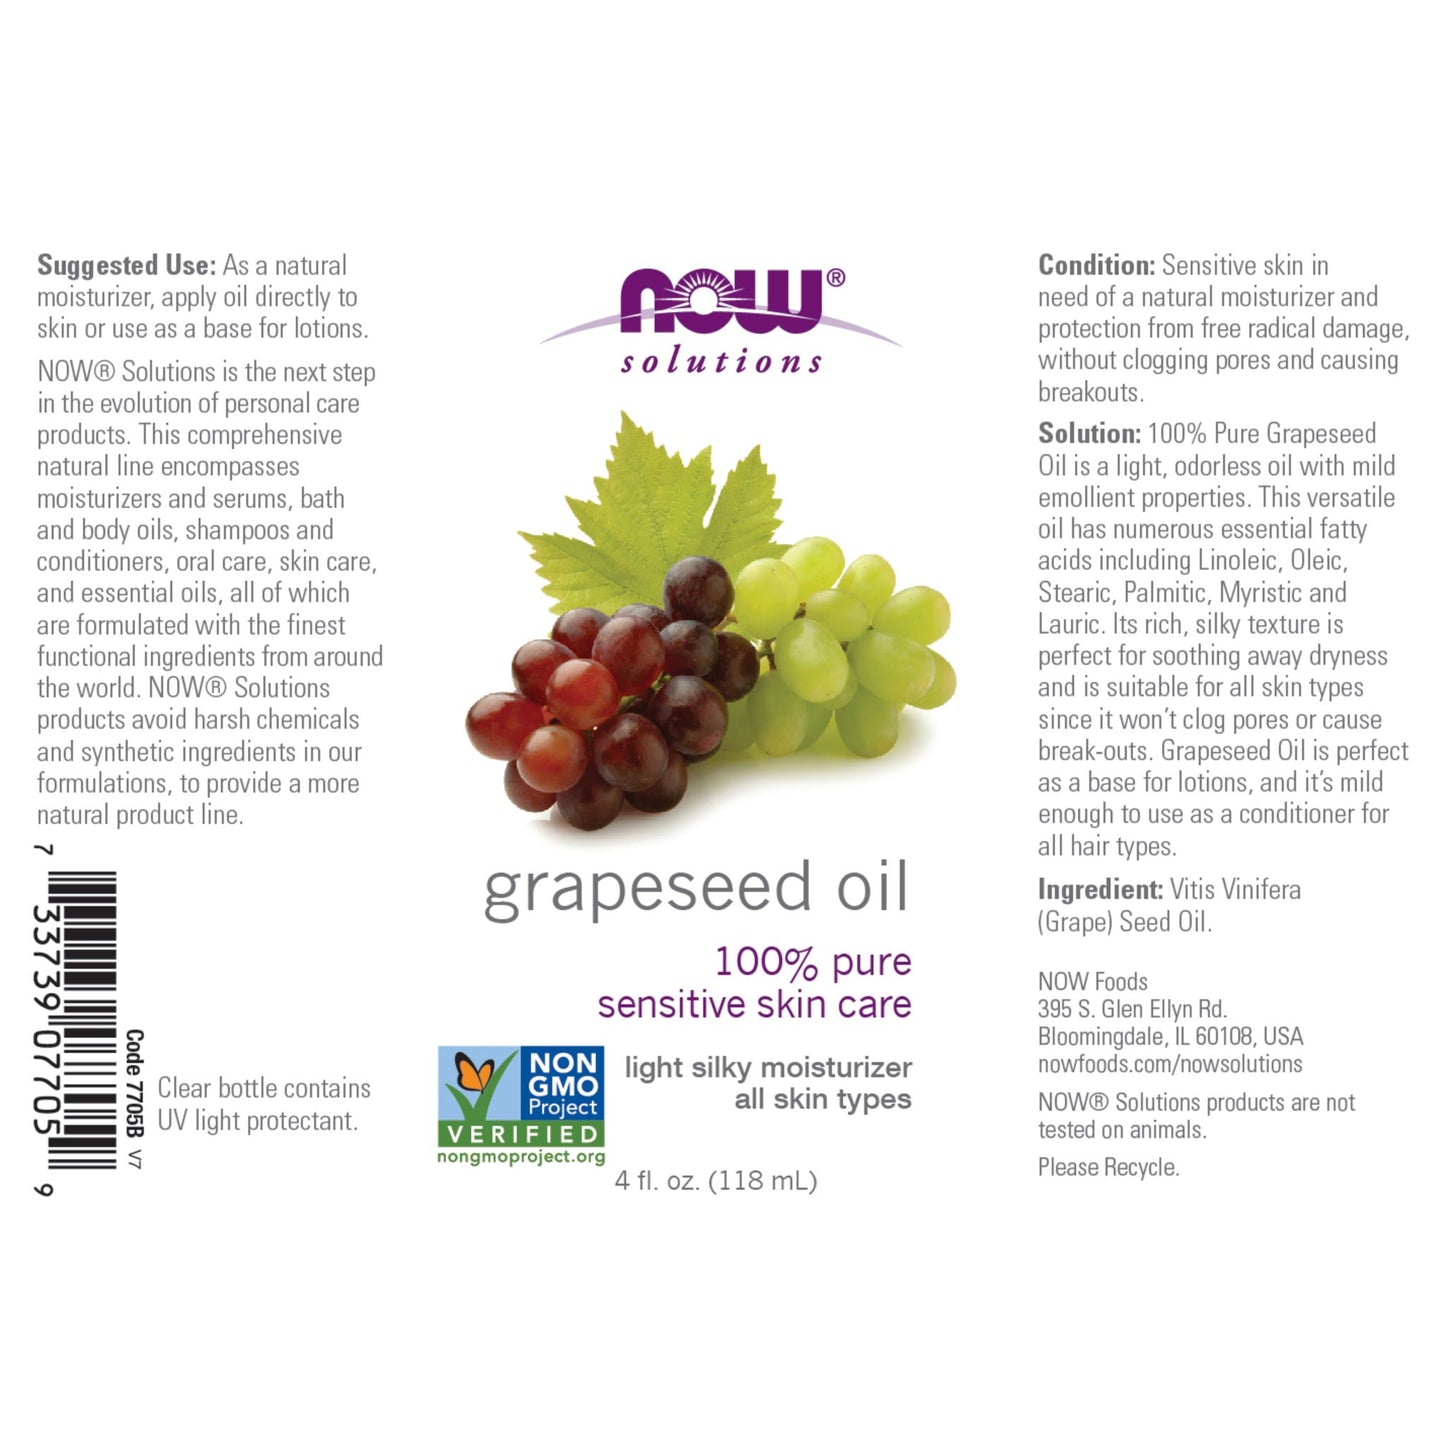 NOW Foods Grapeseed Oil